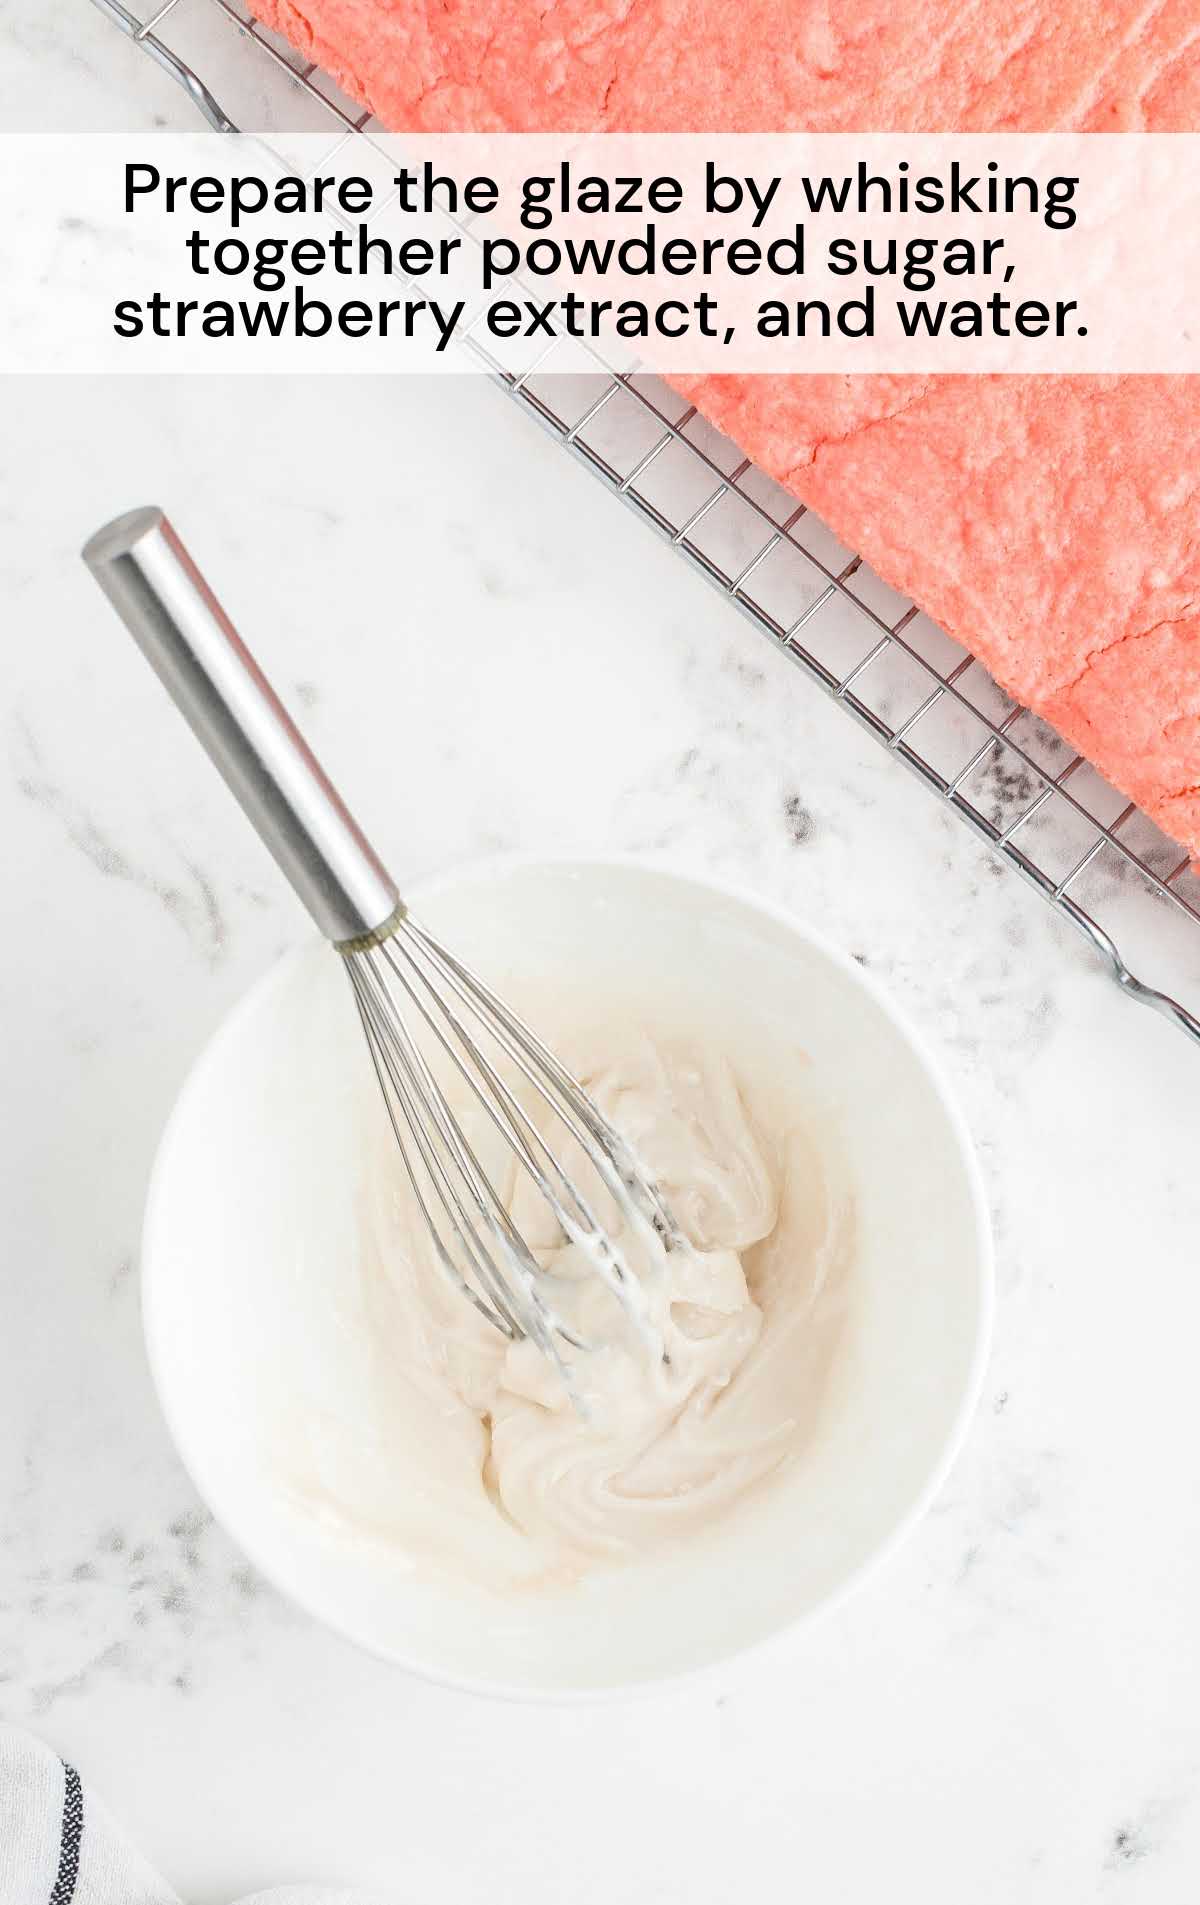 powdered sugar, strawberry extract and water whisked together in a bowl